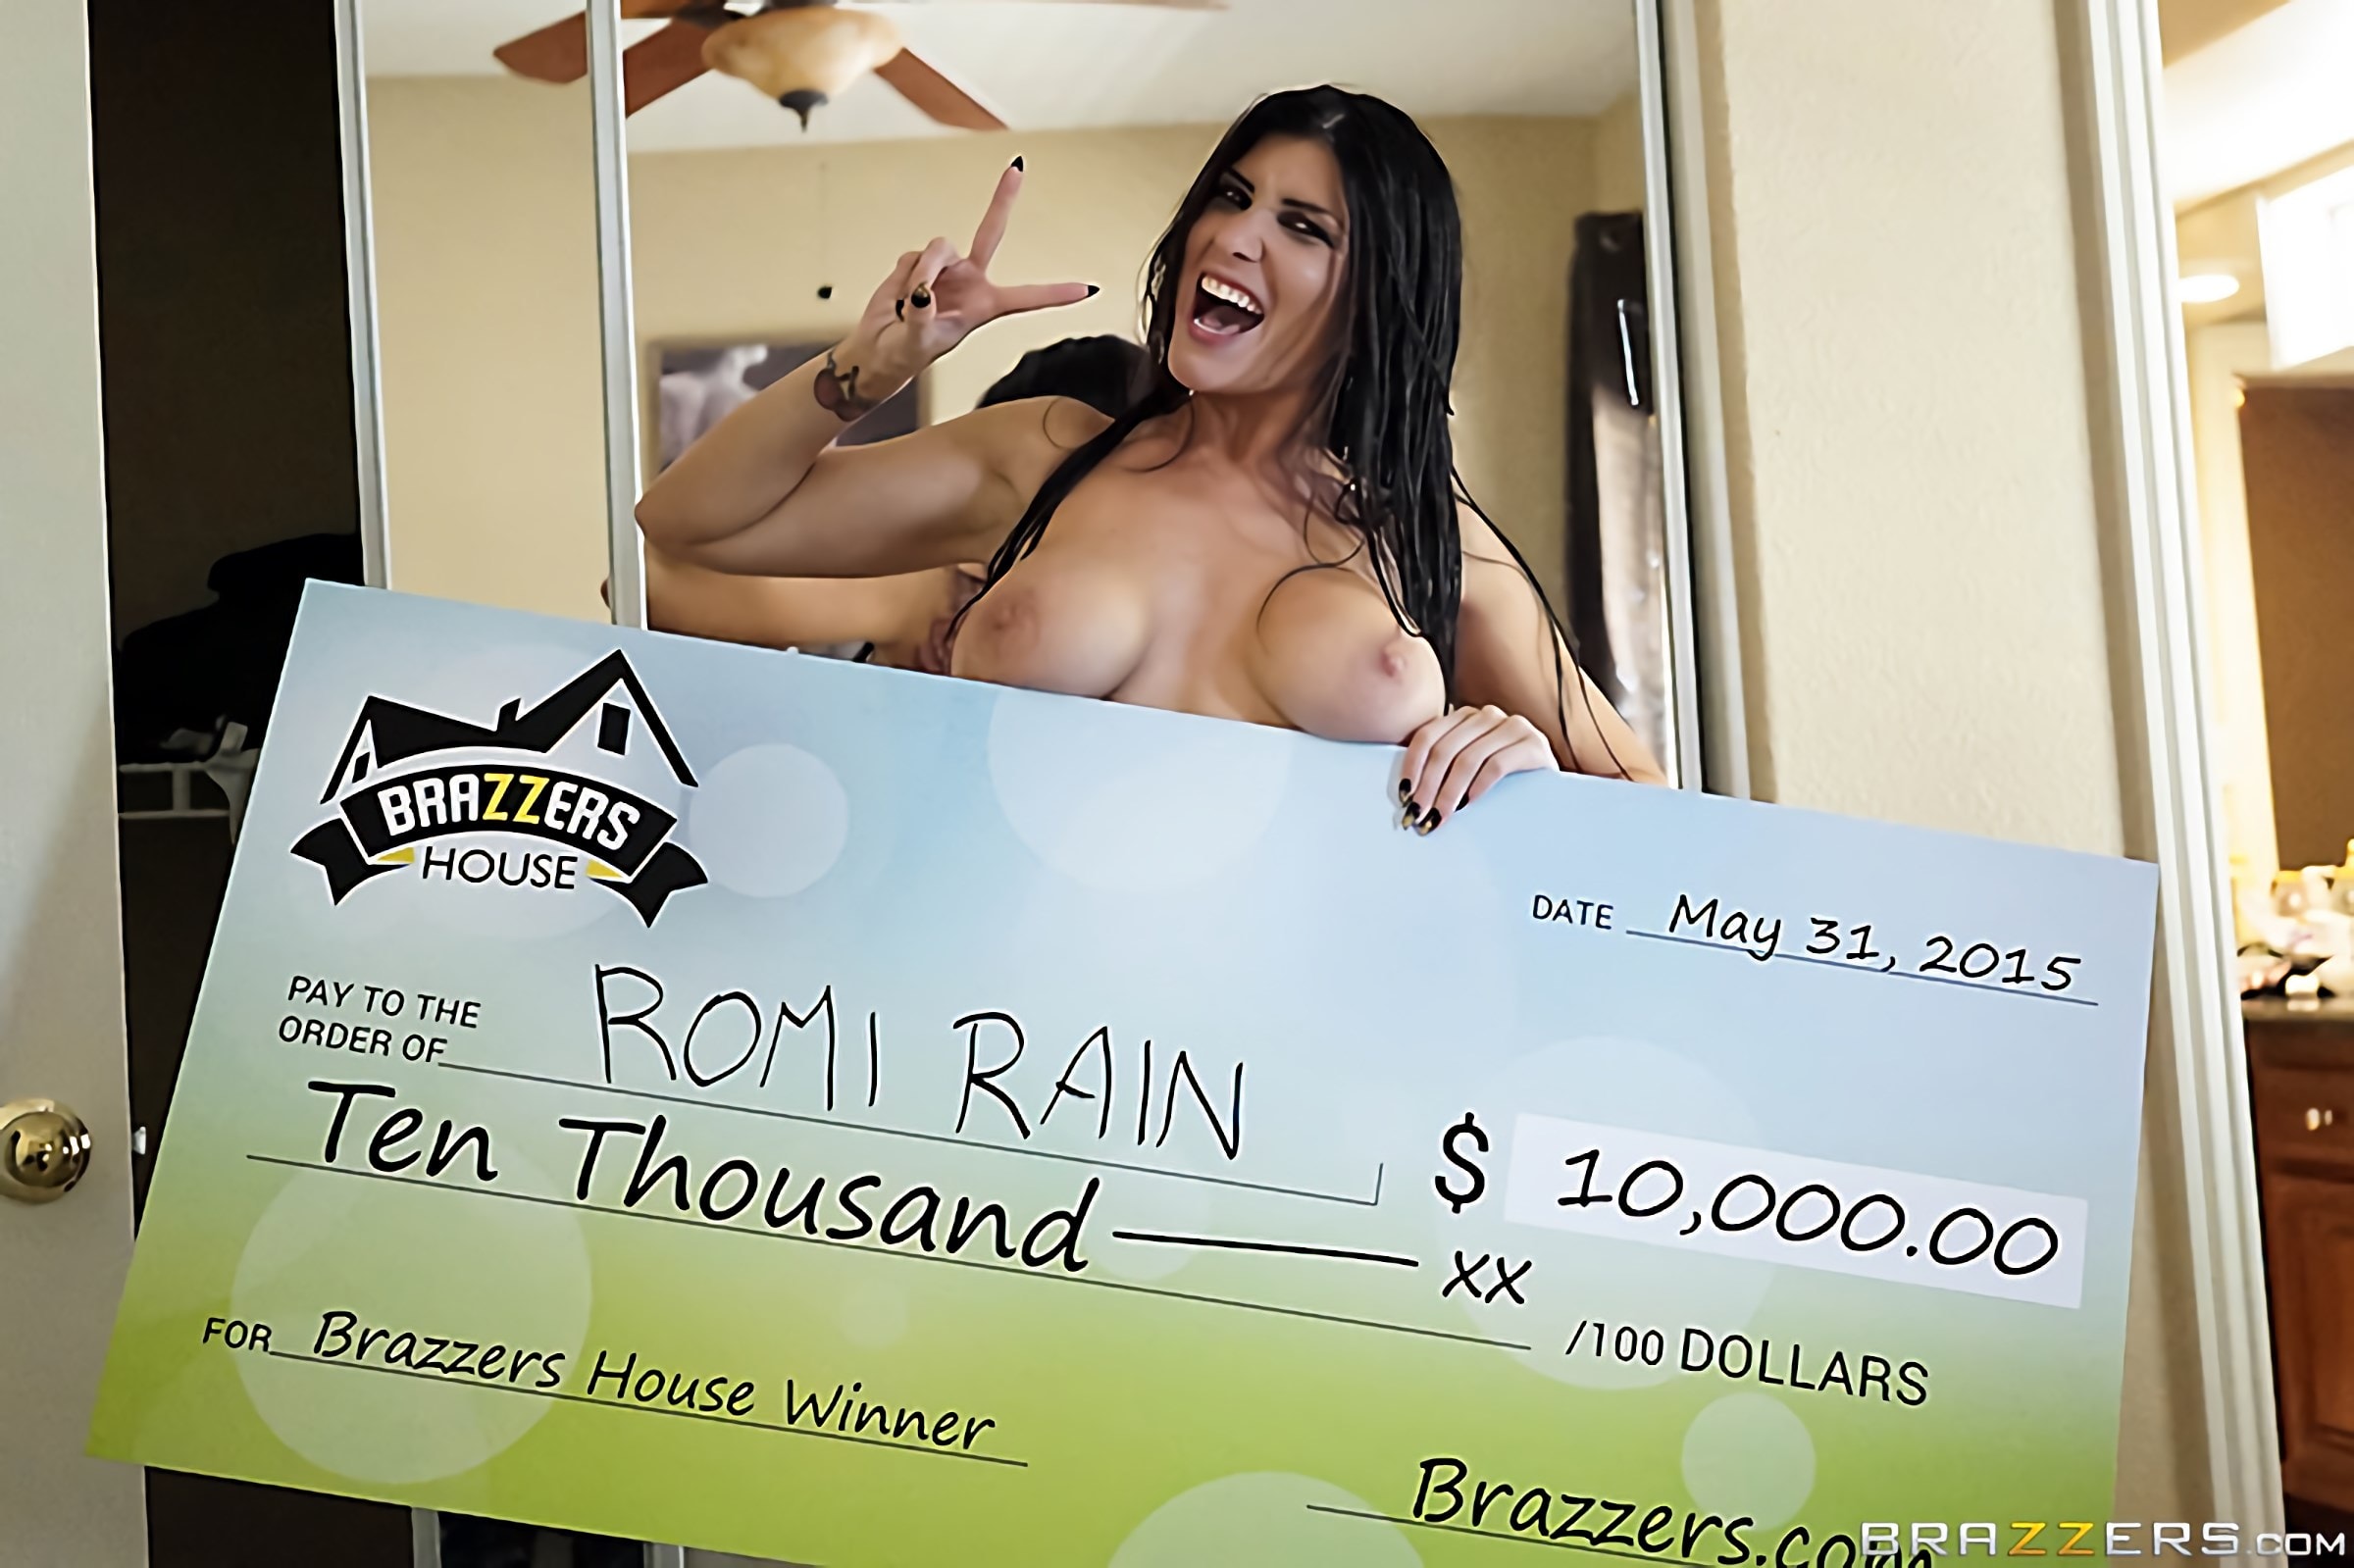 ▷ Ava Addams in Brazzers House Orgy Finale (Photo 15) Brazzers pic